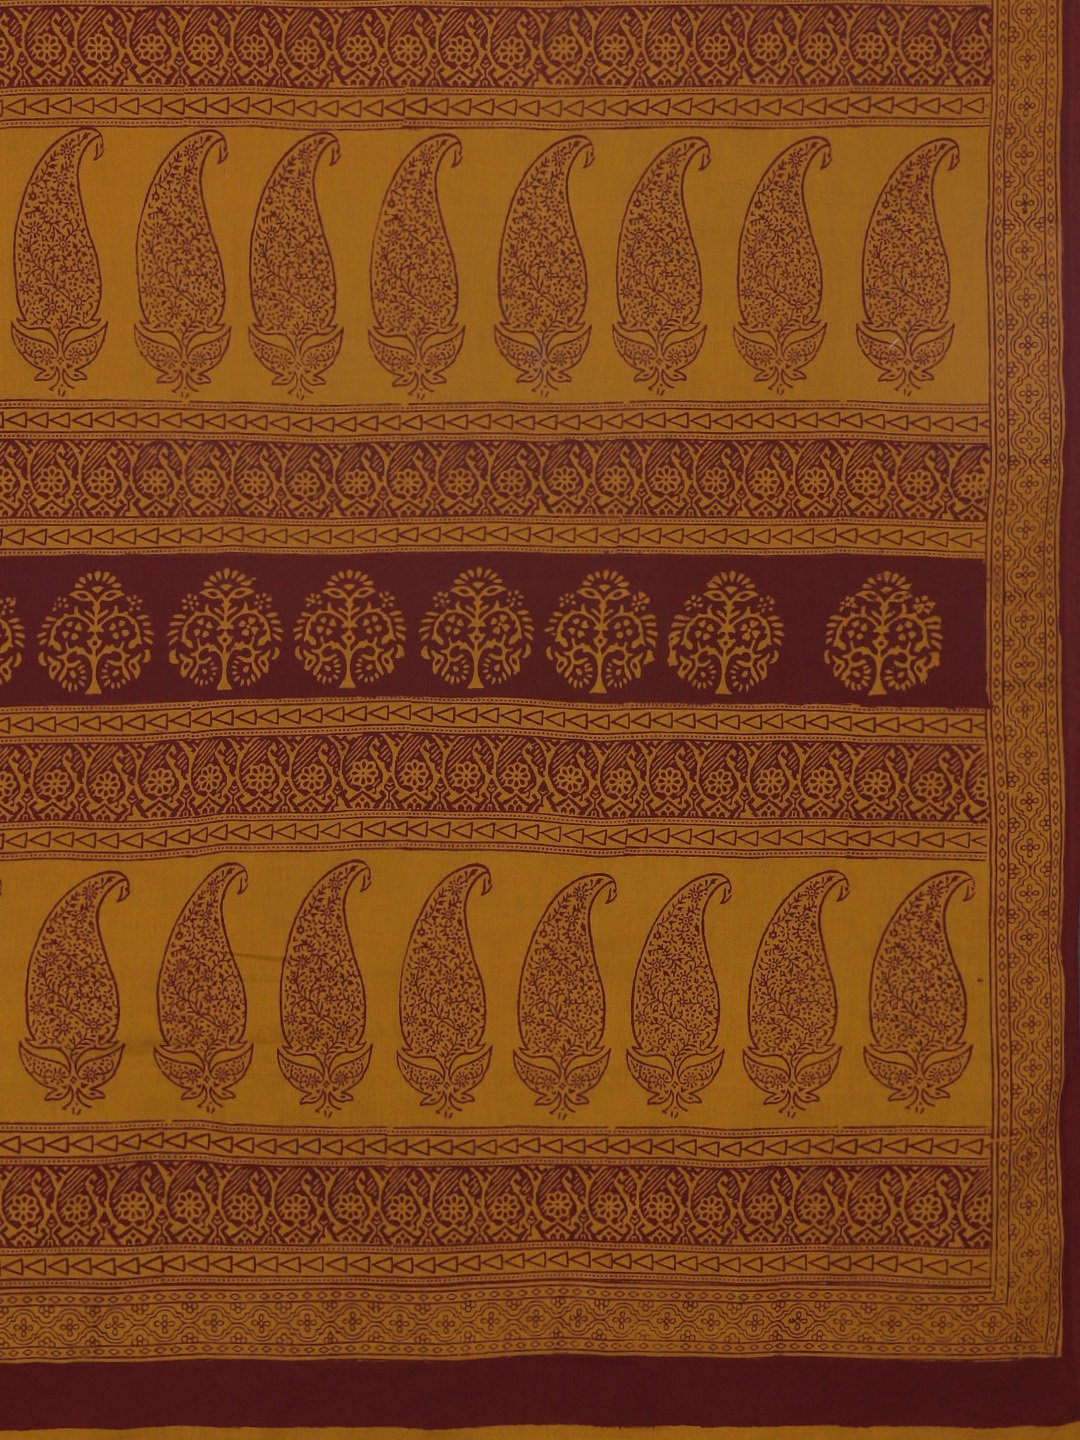 Brown Mustard Yellow Printed Bagh Saree-Saree-Kalakari India-MRBASA0005-Bagh, Cotton, Geographical Indication, Hand Blocks, Hand Crafted, Heritage Prints, Natural Dyes, Sarees, Sustainable Fabrics-[Linen,Ethnic,wear,Fashionista,Handloom,Handicraft,Indigo,blockprint,block,print,Cotton,Chanderi,Blue, latest,classy,party,bollywood,trendy,summer,style,traditional,formal,elegant,unique,style,hand,block,print, dabu,booti,gift,present,glamorous,affordable,collectible,Sari,Saree,printed, holi, Diwali, b